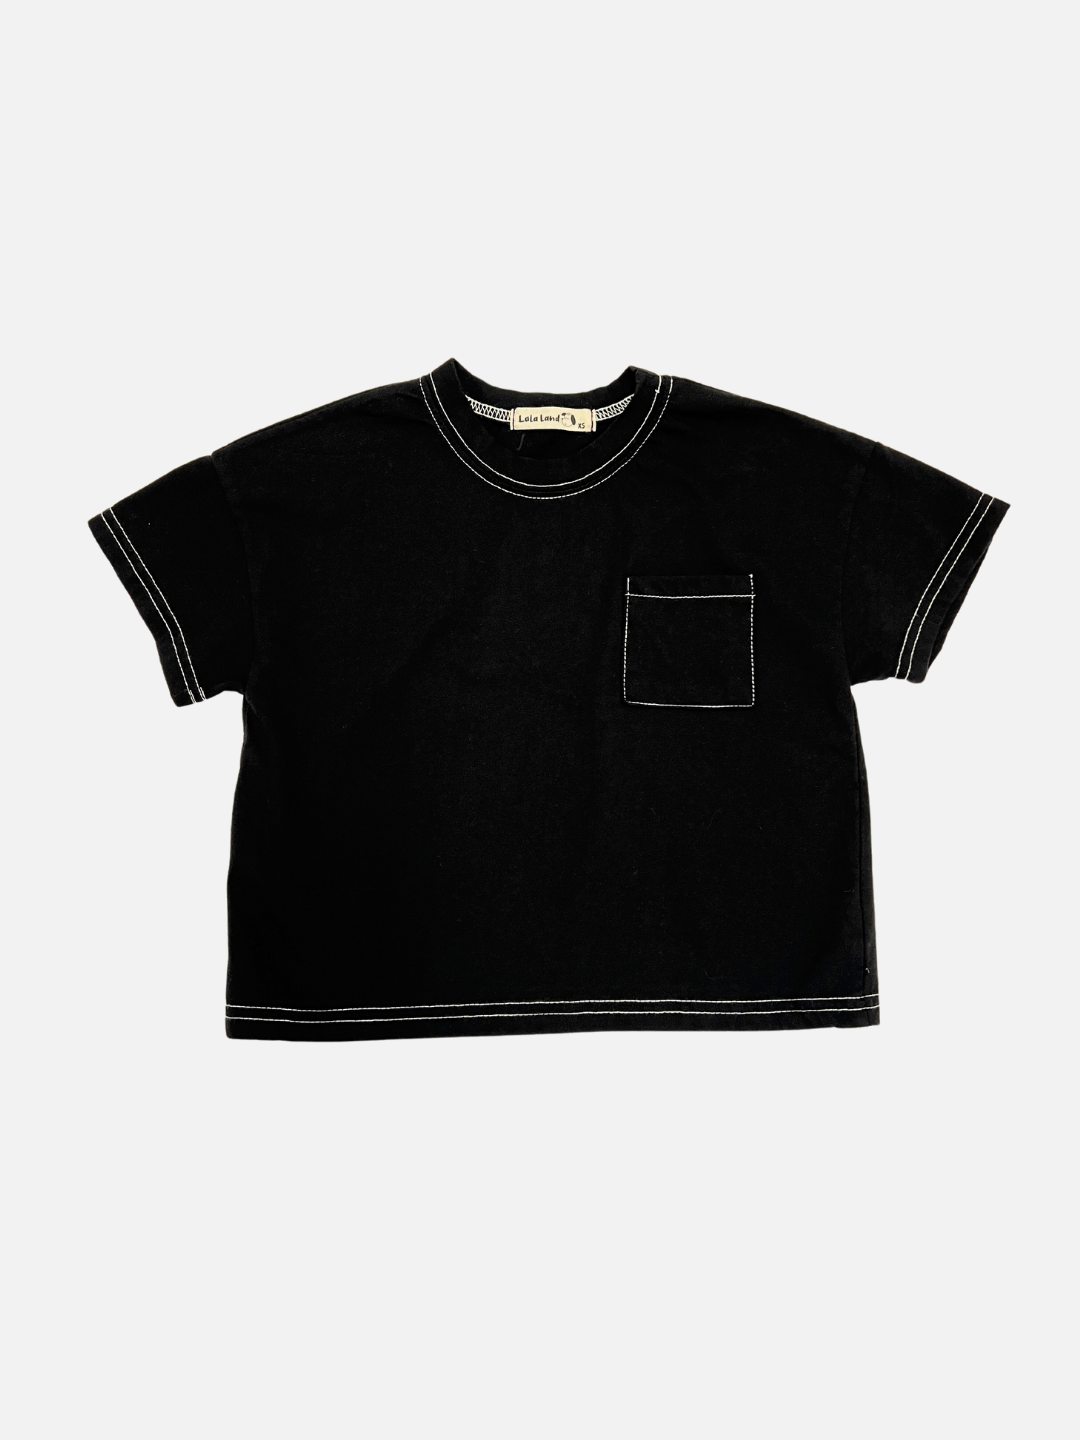 Front view of the kids' stitch pocket tee in Black featuring contrast white stitch and a small pocket on the right side